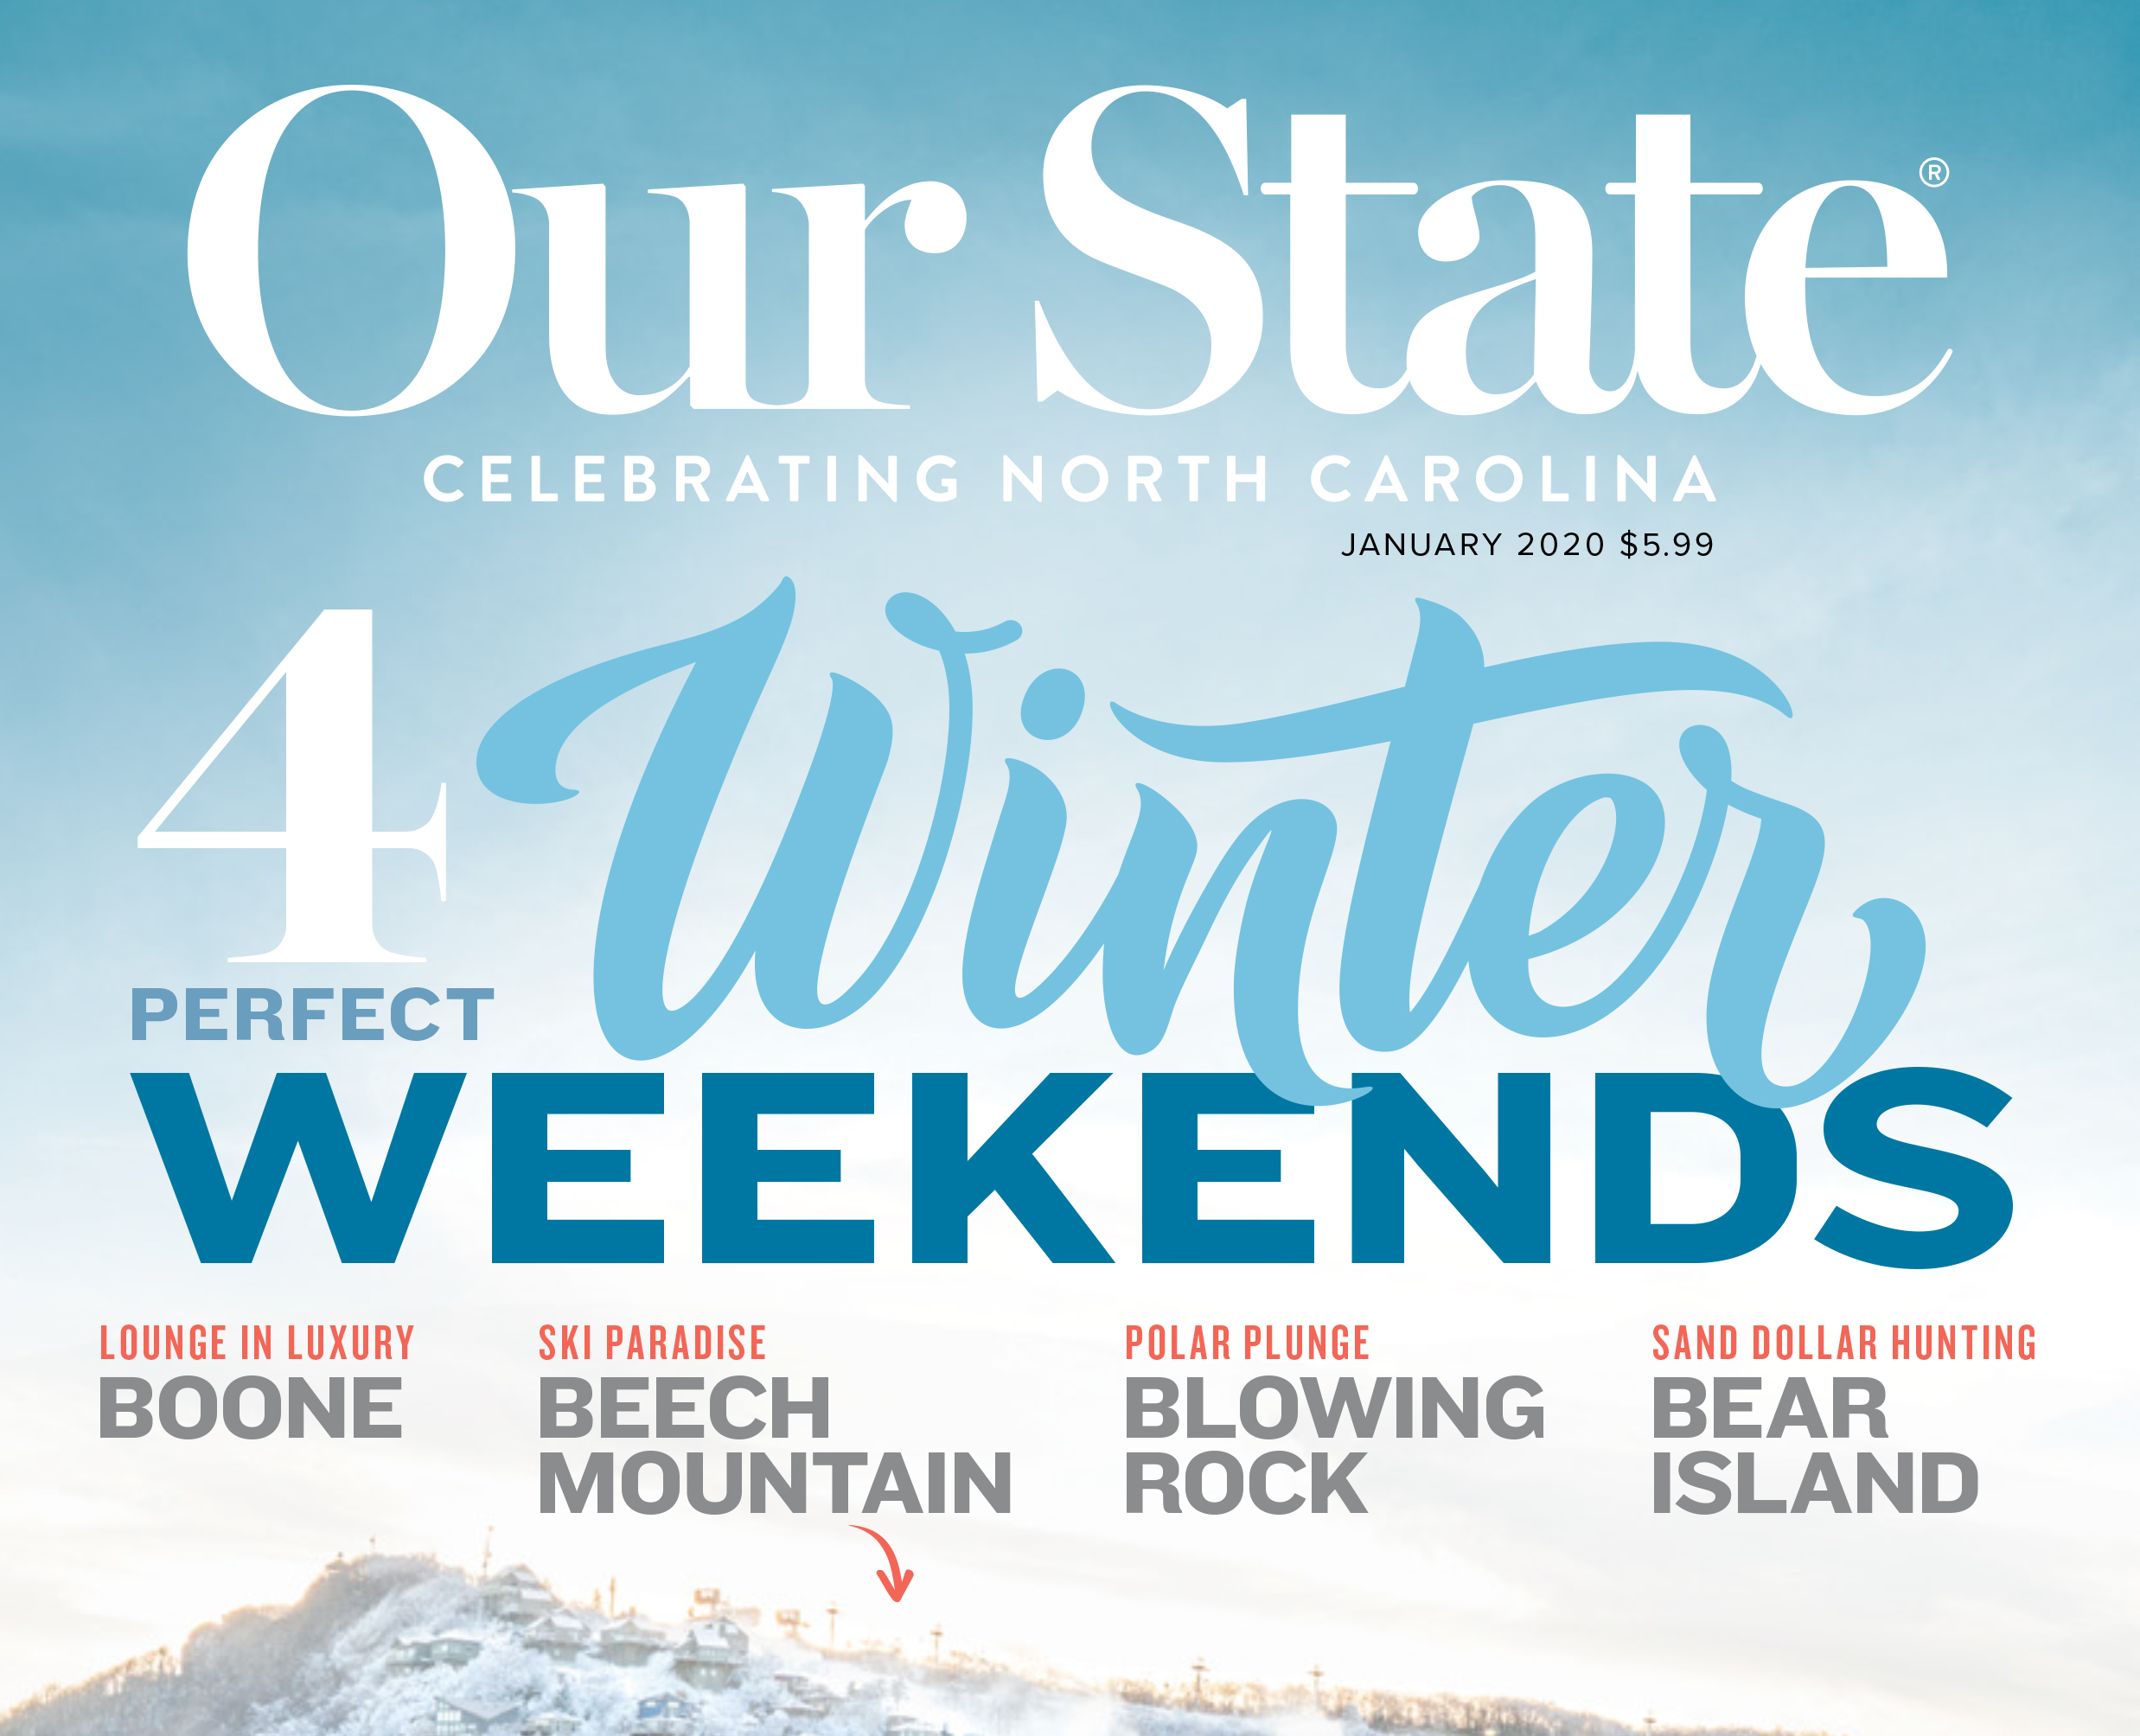 Blowing Rock WinterFest Featured in Our State Magazine